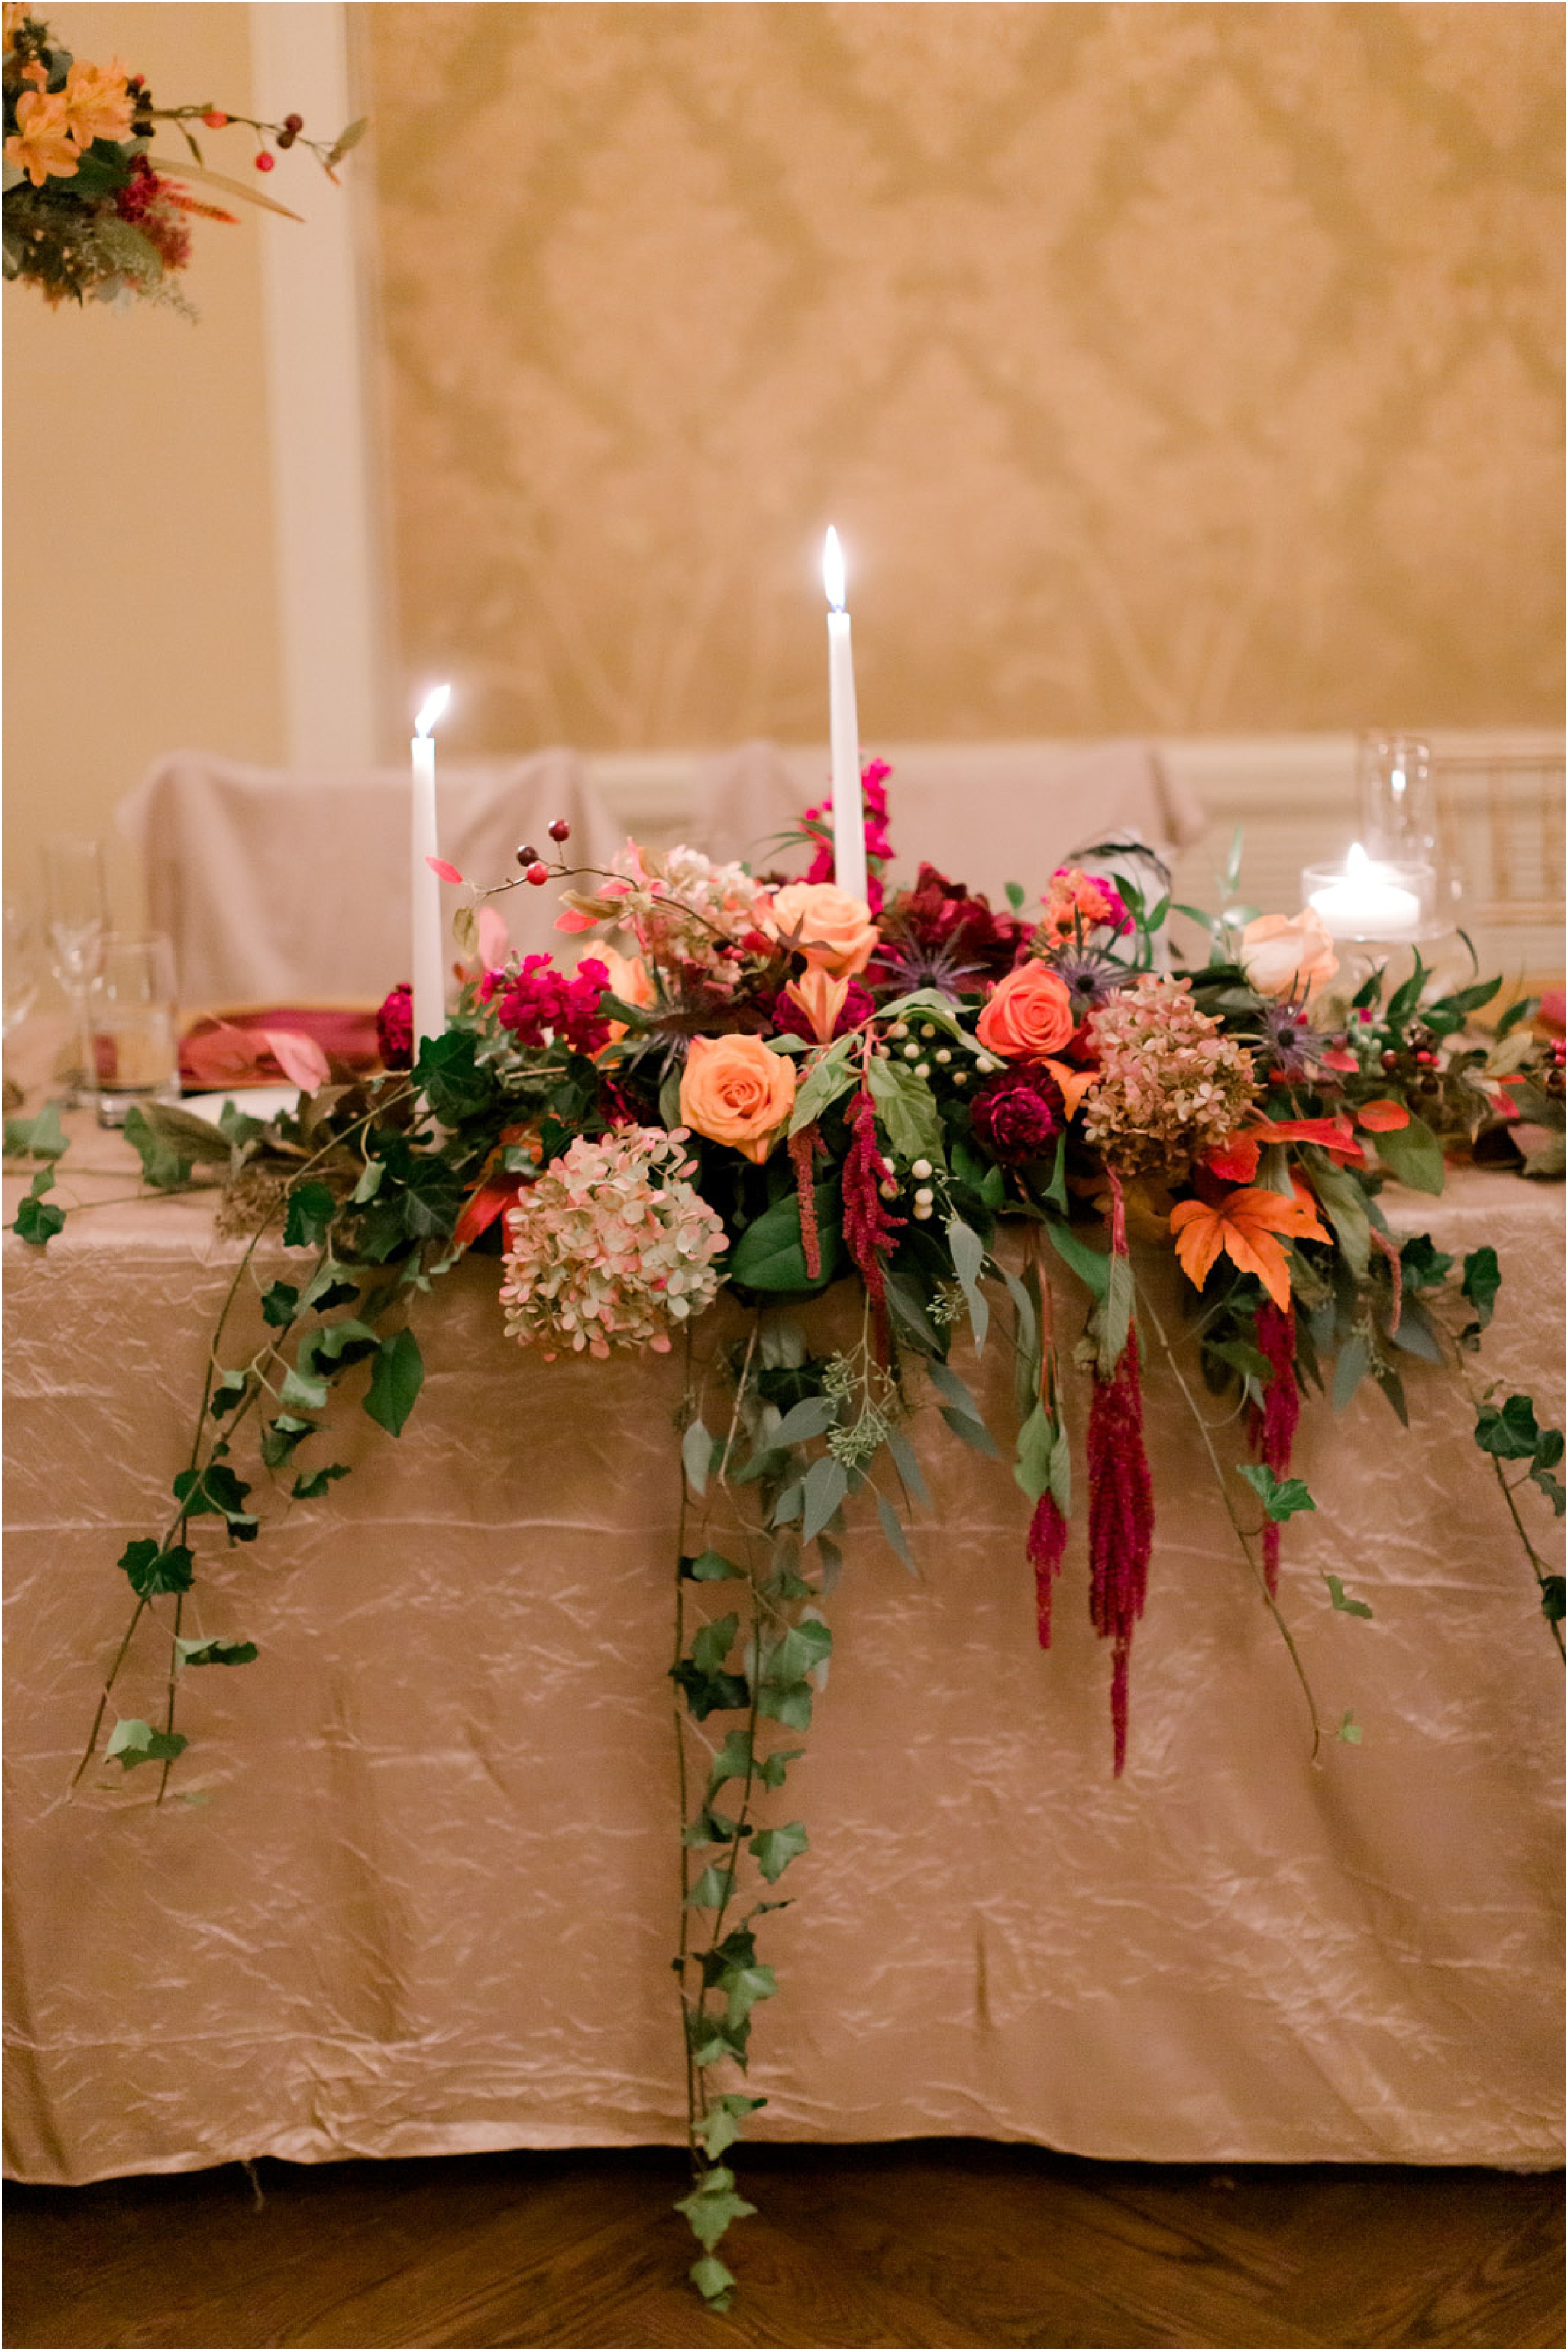 Fall inspired wedding decor and candles